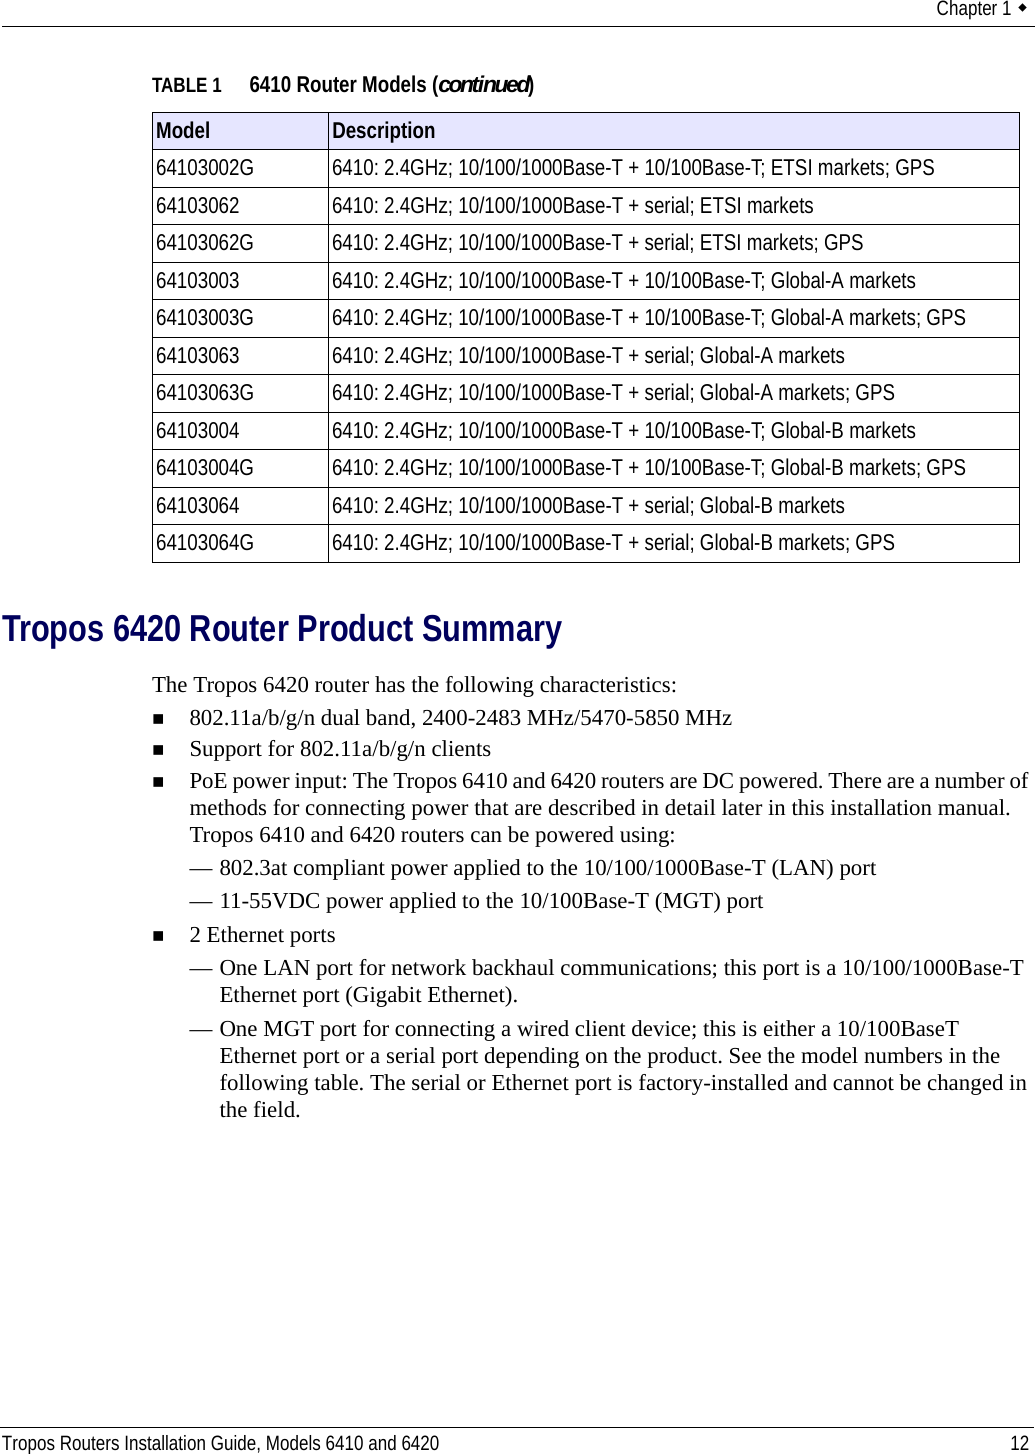 Chapter 1  Tropos Routers Installation Guide, Models 6410 and 6420 12Tropos 6420 Router Product SummaryThe Tropos 6420 router has the following characteristics: 802.11a/b/g/n dual band, 2400-2483 MHz/5470-5850 MHzSupport for 802.11a/b/g/n clientsPoE power input: The Tropos 6410 and 6420 routers are DC powered. There are a number of methods for connecting power that are described in detail later in this installation manual. Tropos 6410 and 6420 routers can be powered using:— 802.3at compliant power applied to the 10/100/1000Base-T (LAN) port— 11-55VDC power applied to the 10/100Base-T (MGT) port2 Ethernet ports— One LAN port for network backhaul communications; this port is a 10/100/1000Base-T Ethernet port (Gigabit Ethernet).— One MGT port for connecting a wired client device; this is either a 10/100BaseT Ethernet port or a serial port depending on the product. See the model numbers in the following table. The serial or Ethernet port is factory-installed and cannot be changed in the field.64103002G 6410: 2.4GHz; 10/100/1000Base-T + 10/100Base-T; ETSI markets; GPS64103062 6410: 2.4GHz; 10/100/1000Base-T + serial; ETSI markets64103062G 6410: 2.4GHz; 10/100/1000Base-T + serial; ETSI markets; GPS64103003 6410: 2.4GHz; 10/100/1000Base-T + 10/100Base-T; Global-A markets64103003G 6410: 2.4GHz; 10/100/1000Base-T + 10/100Base-T; Global-A markets; GPS64103063 6410: 2.4GHz; 10/100/1000Base-T + serial; Global-A markets64103063G 6410: 2.4GHz; 10/100/1000Base-T + serial; Global-A markets; GPS64103004 6410: 2.4GHz; 10/100/1000Base-T + 10/100Base-T; Global-B markets64103004G 6410: 2.4GHz; 10/100/1000Base-T + 10/100Base-T; Global-B markets; GPS64103064 6410: 2.4GHz; 10/100/1000Base-T + serial; Global-B markets64103064G 6410: 2.4GHz; 10/100/1000Base-T + serial; Global-B markets; GPSTABLE 1 6410 Router Models (continued)Model  Description